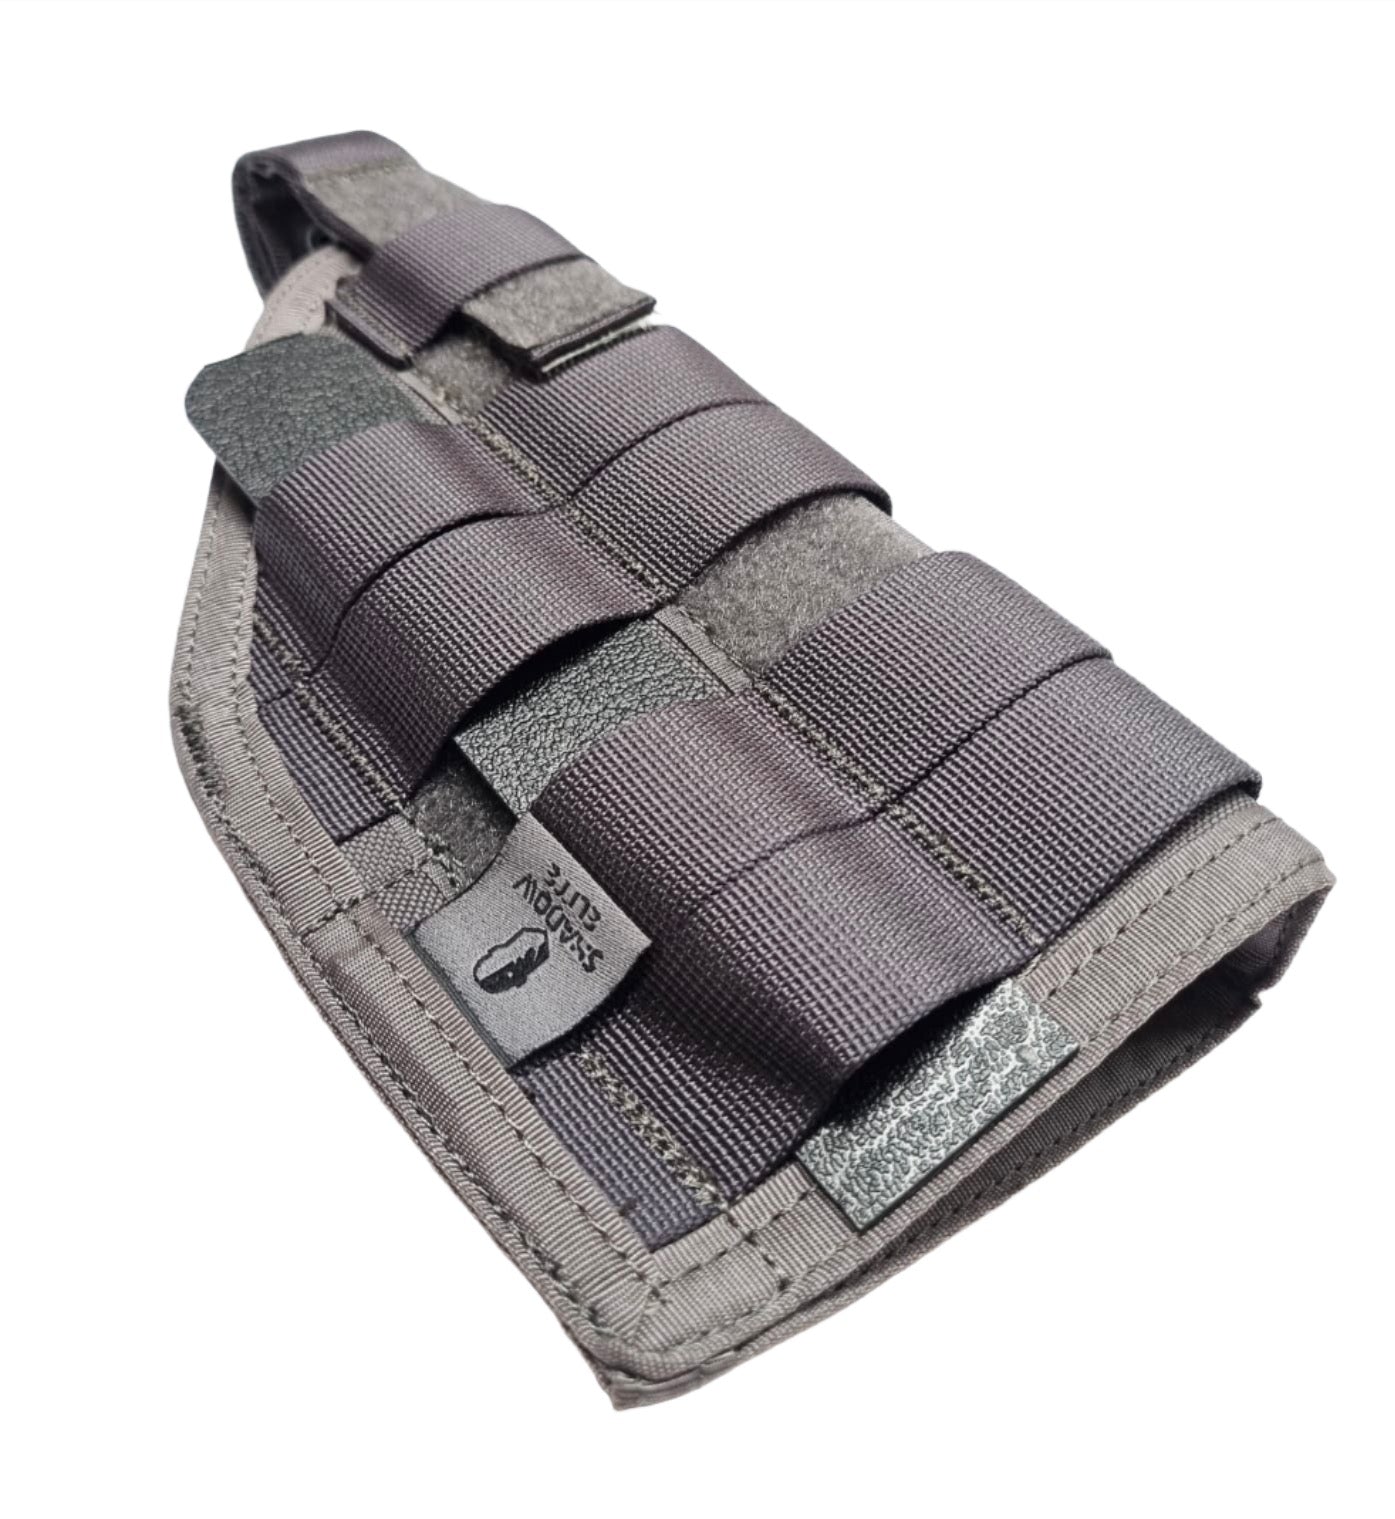 SHE-714 Camouflage Molle Pistol Holster Colour Grey front view.